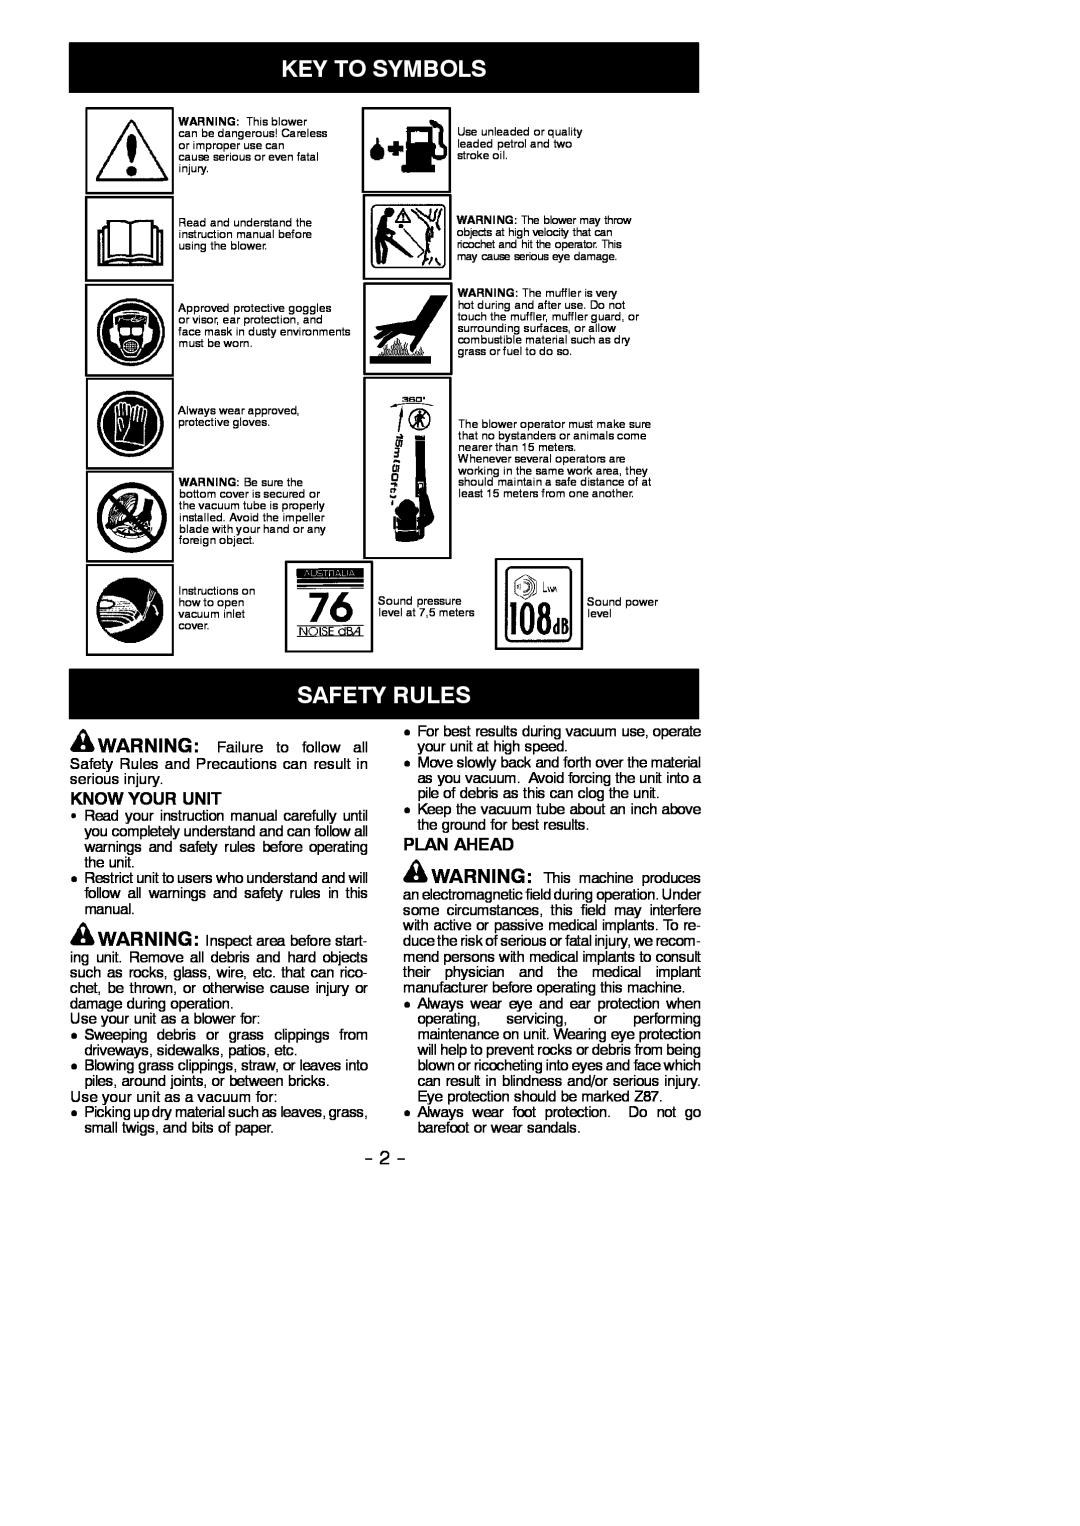 Partner Tech GBV 345 instruction manual Key To Symbols, Safety Rules, Know Your Unit, Plan Ahead 